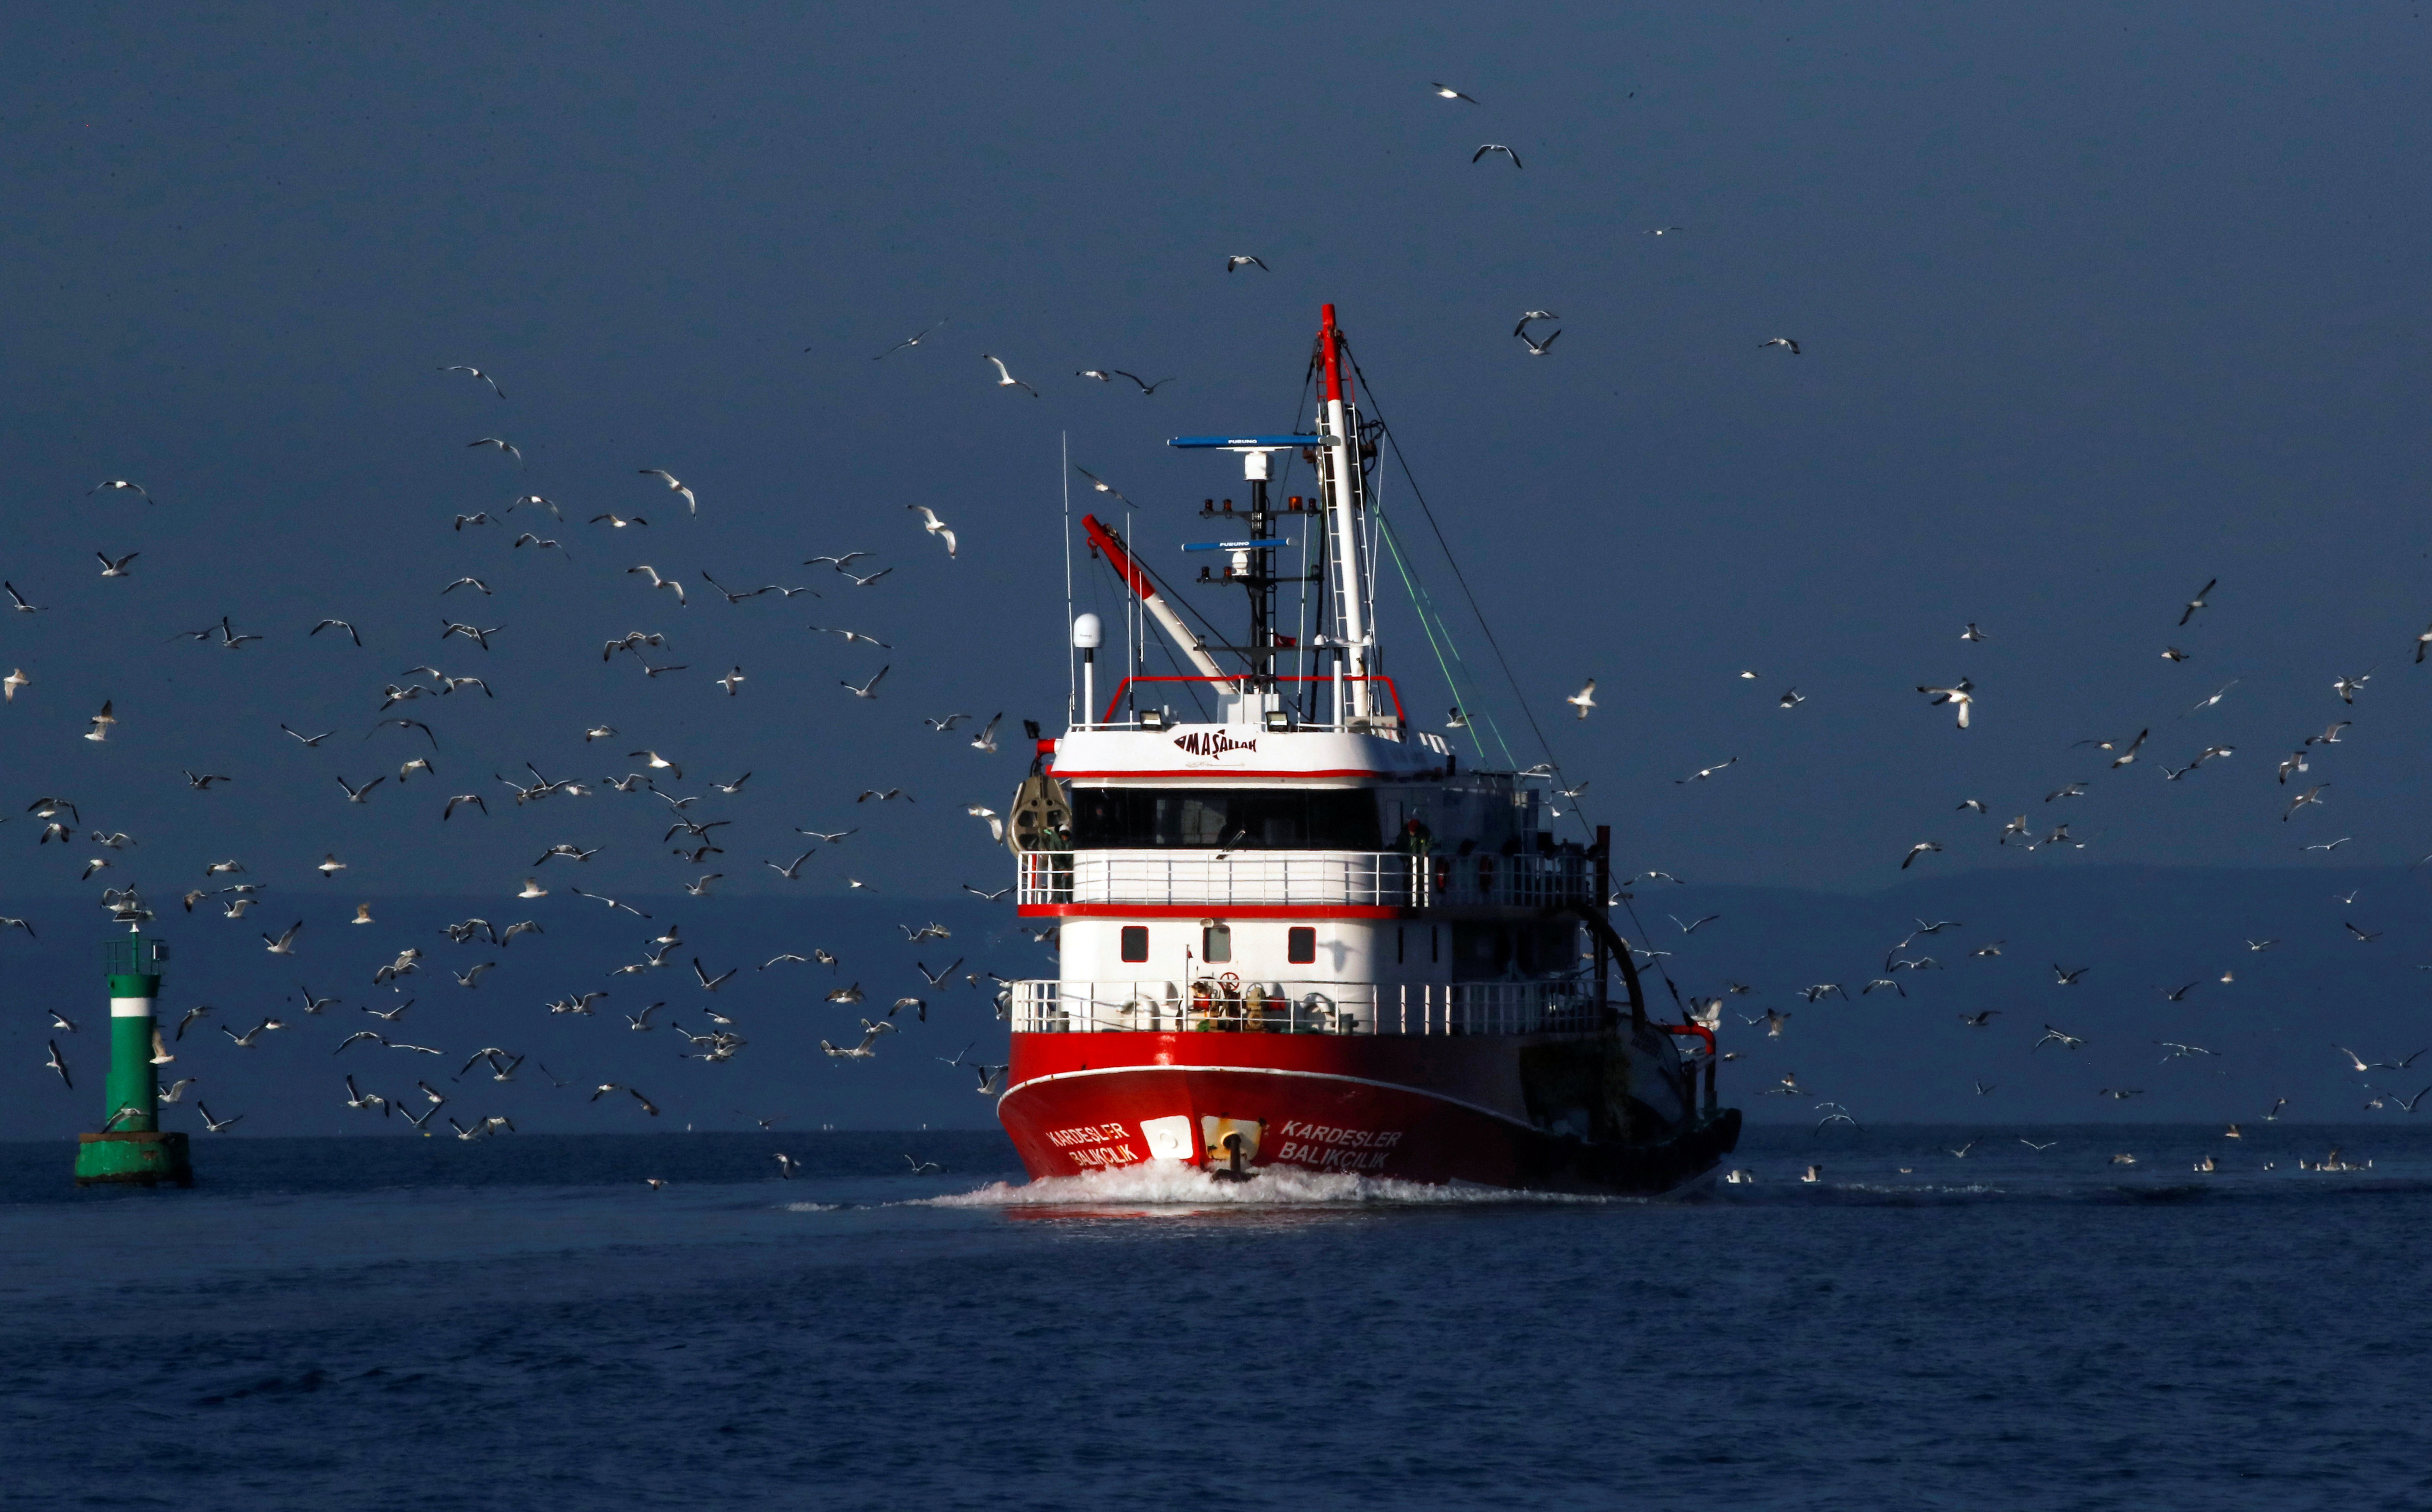 Seagulls fly over a fishing boat on the waters of the North Aegean Sea off the shores of Balikesir